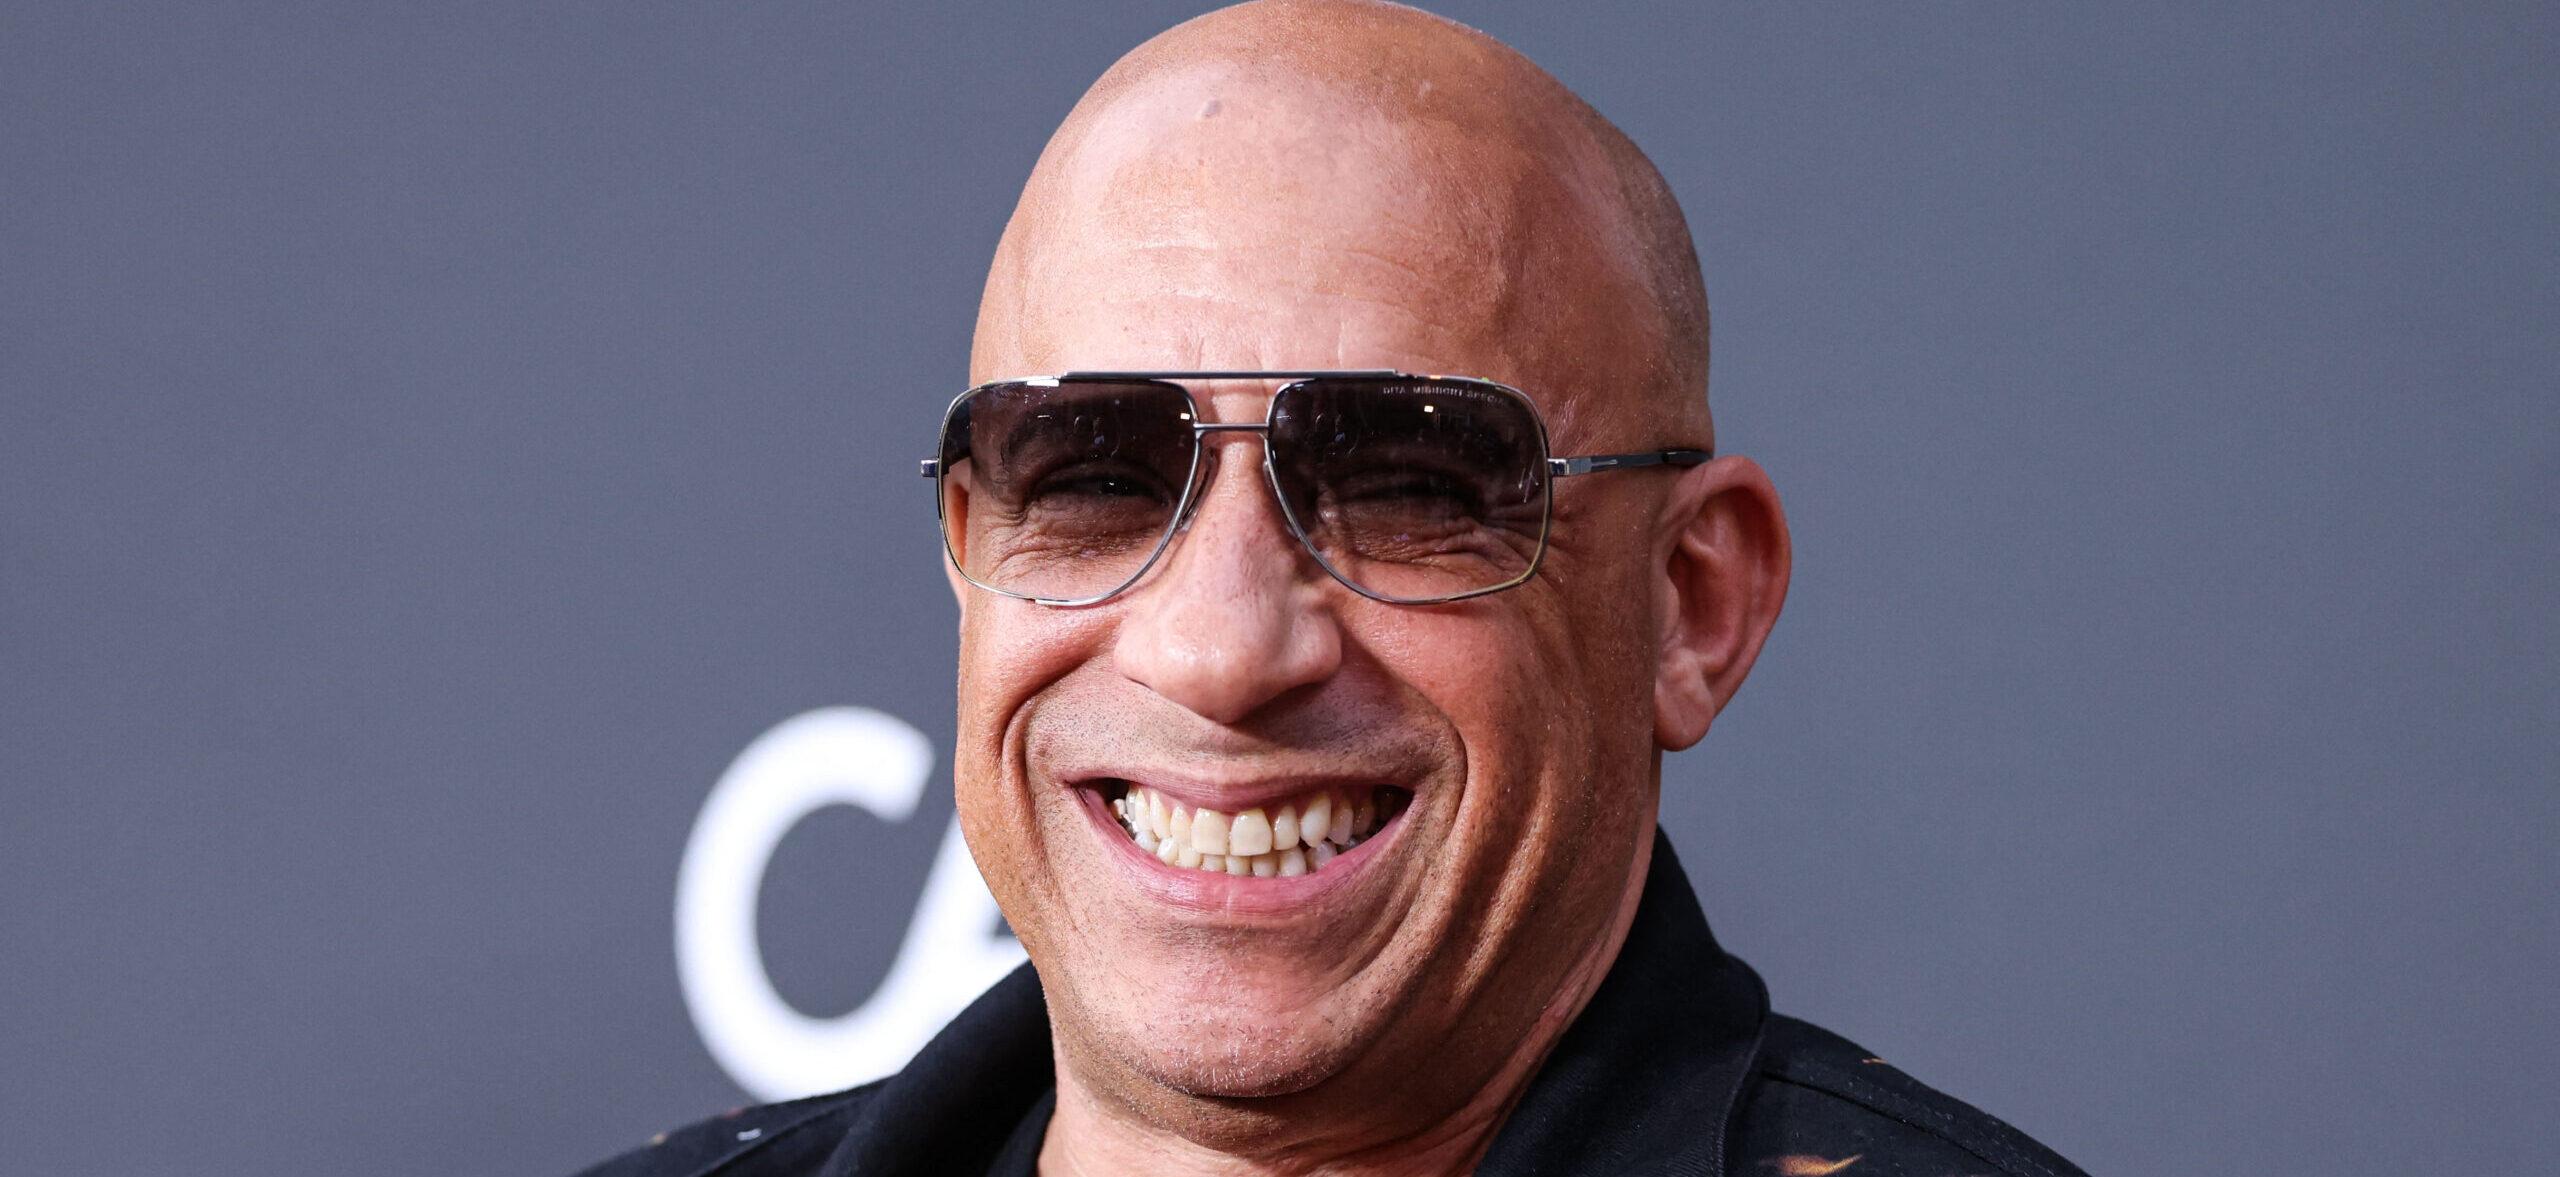 Vin Diesel Slammed For Making Woman 'Uncomfortable' In Old Clip Amid Sexual Assault Allegations